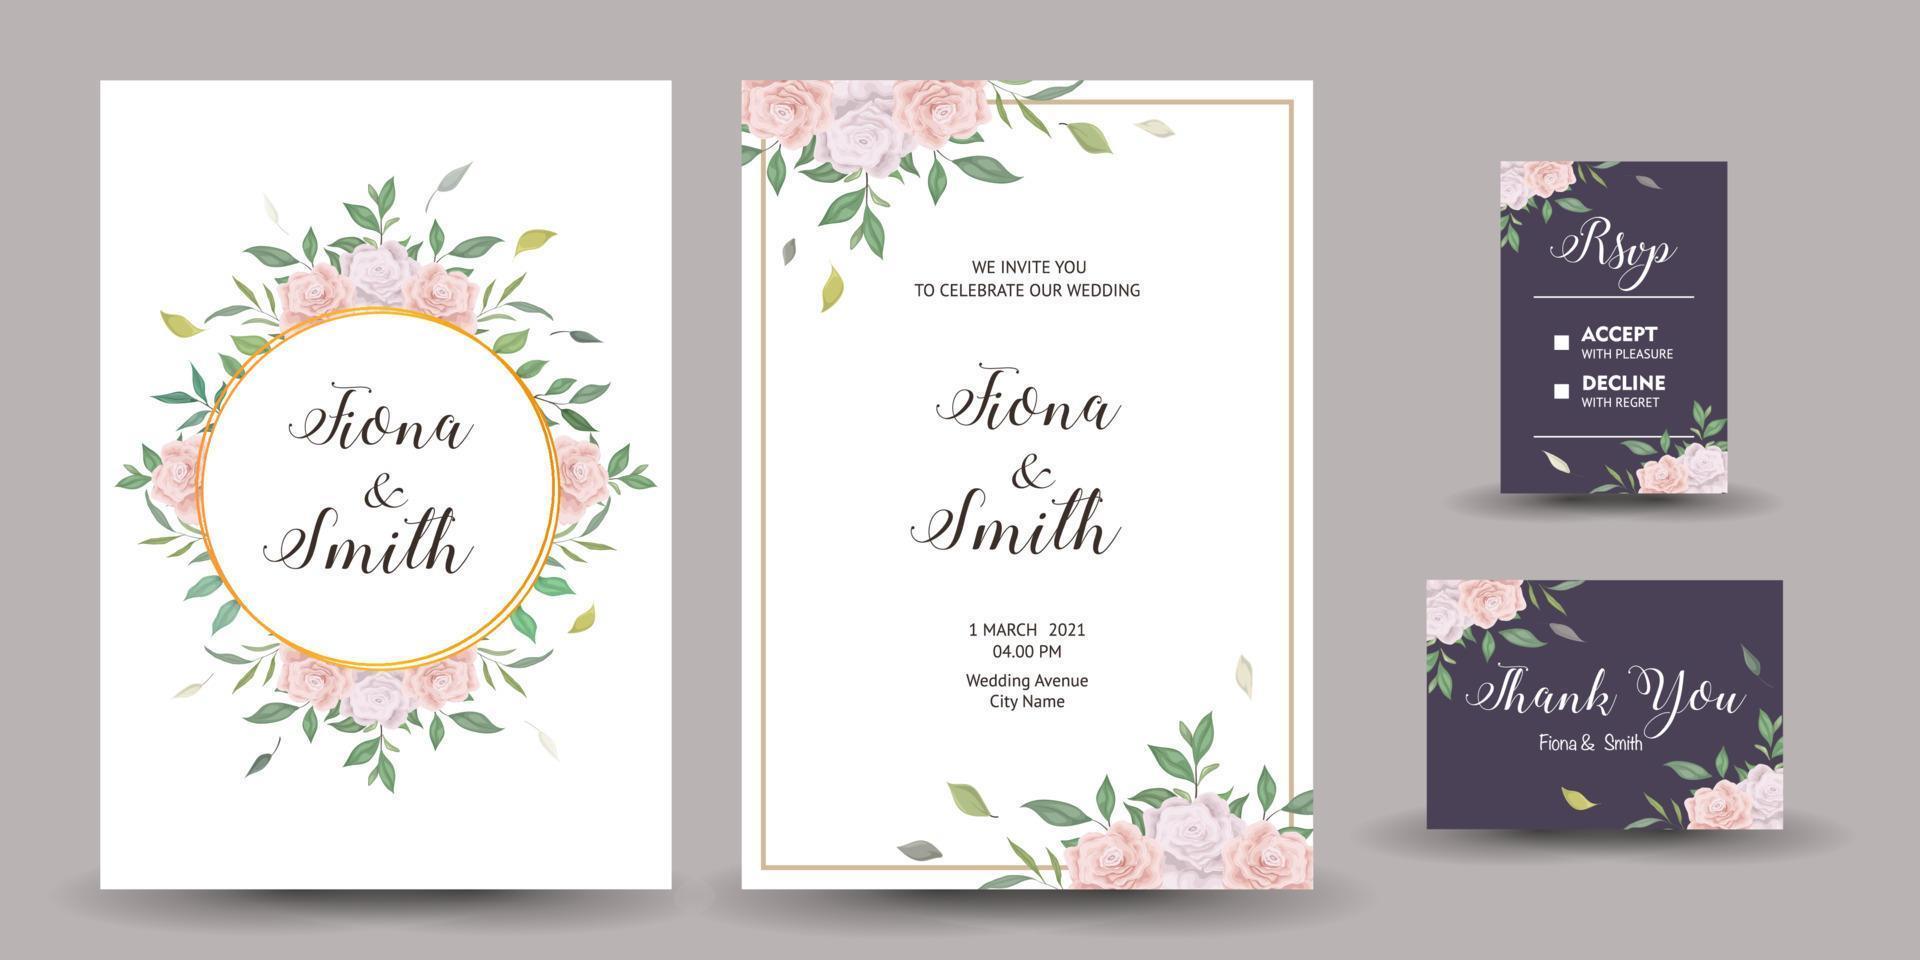 beautiful wedding invitation with floral background design. vector